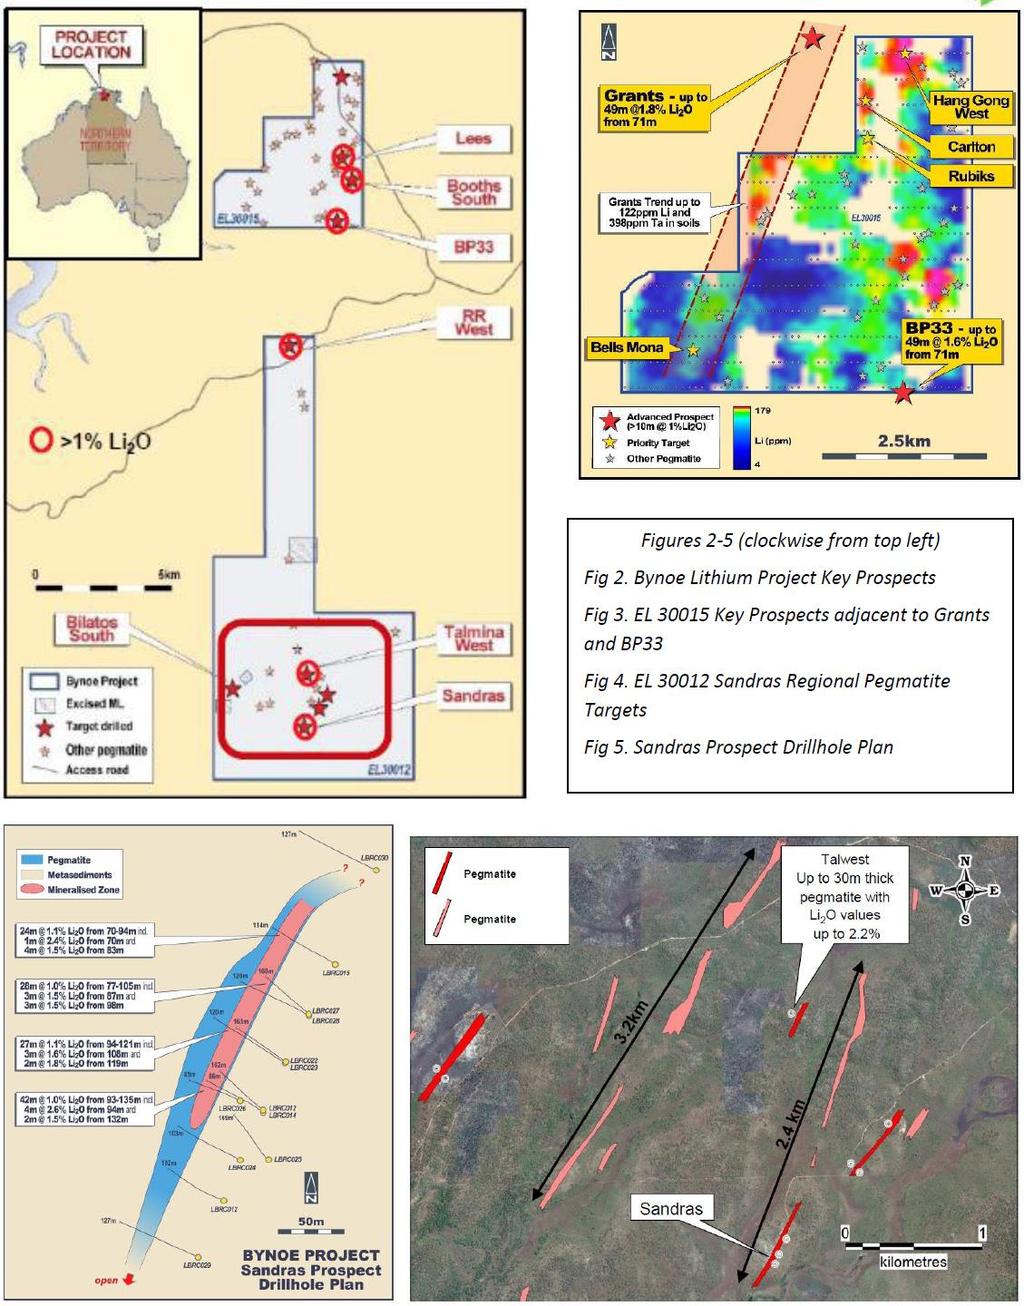 NEW BYNOE LITHIUM PROJECT Widespread spodumene above 1% Li 2 O Previous drilling has confirmed widespread spodumene related lithium mineralisation above 1% Li 2 O within the new Bynoe Project Broad